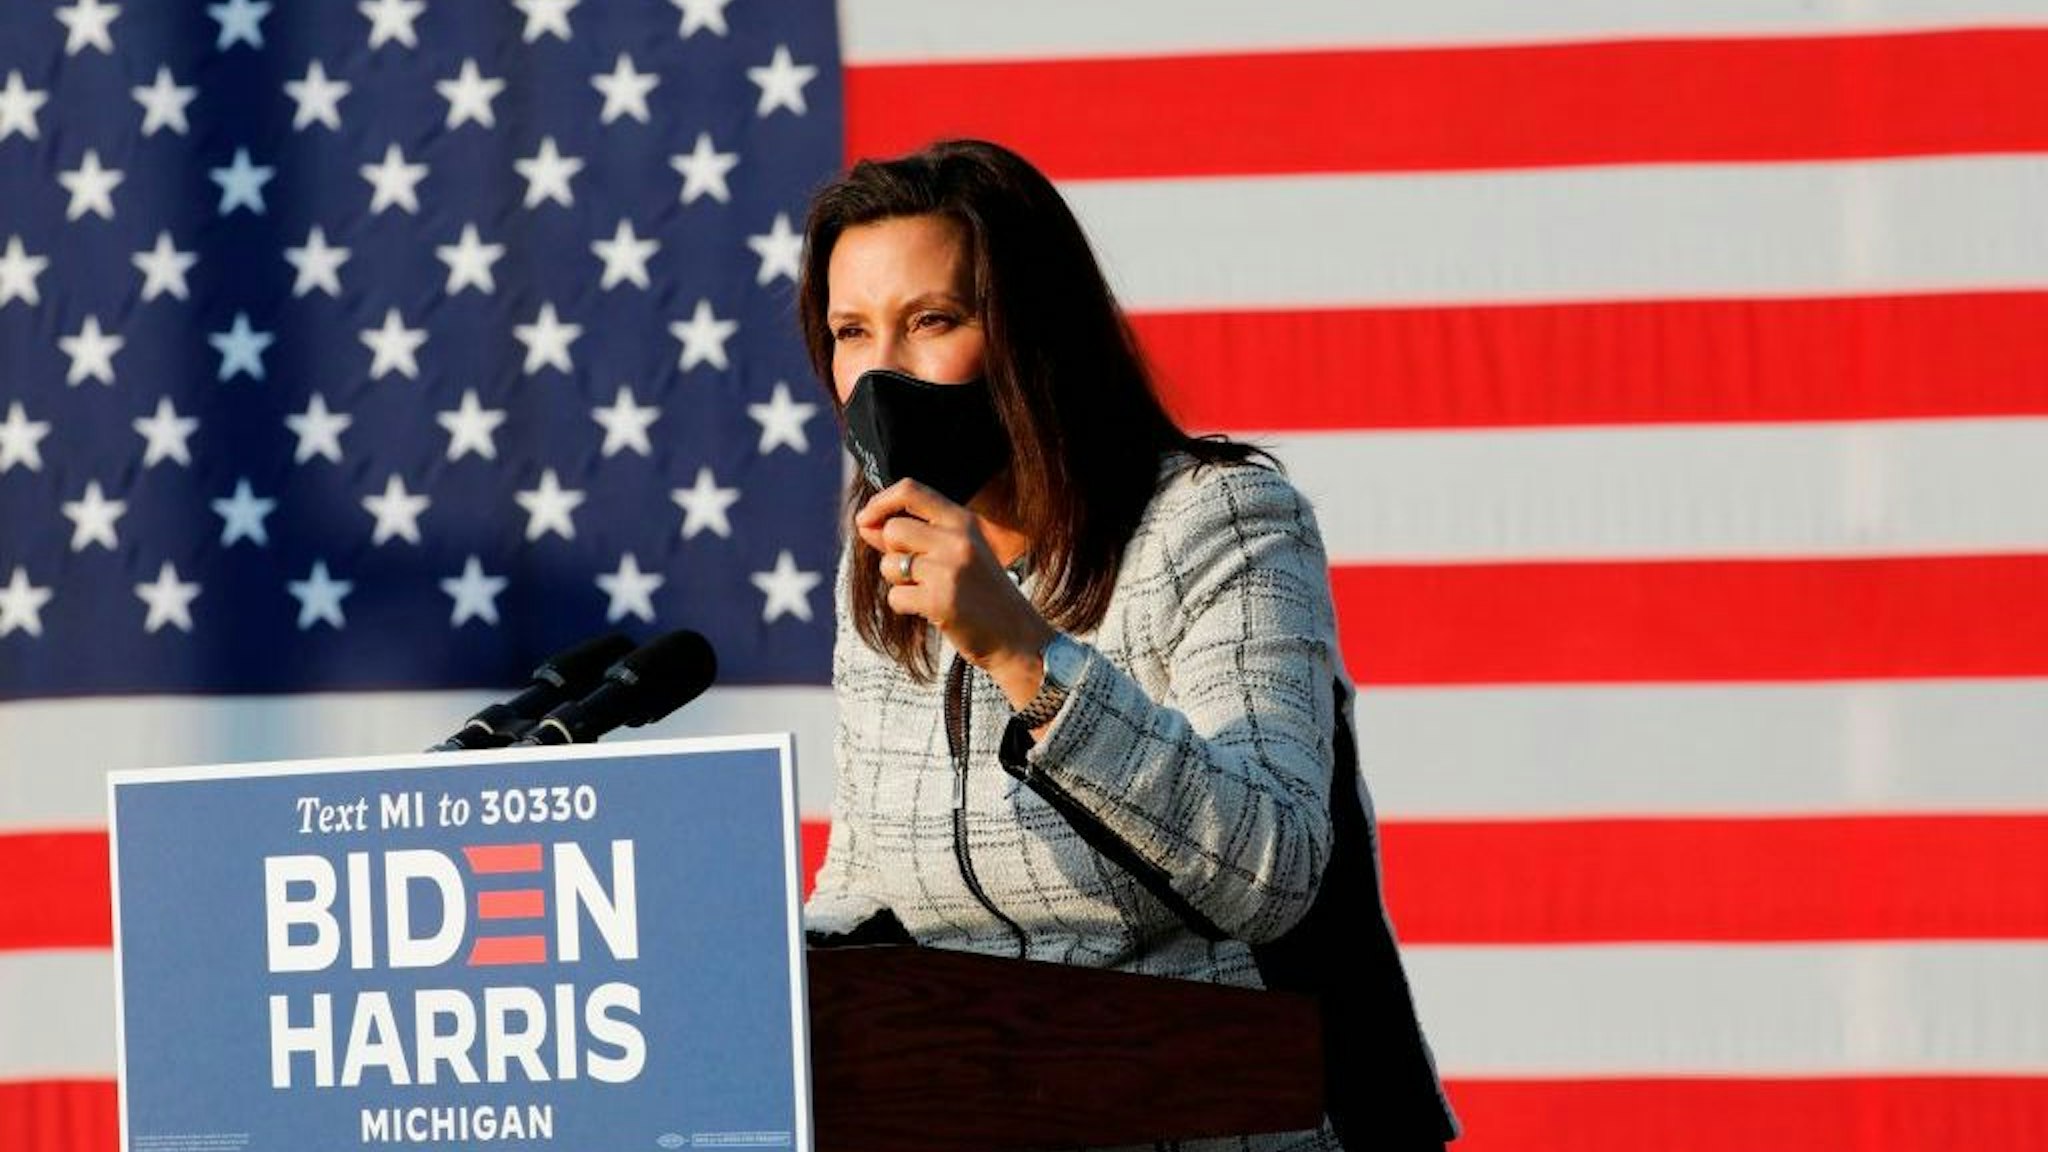 Michigan Governor Gretchen Whitmer speaks before Democratic Vice Presidential Nominee Senator Kamala Harris (D-CA) at the Detroit Pistons Practice Facility in Detroit, Michigan on September 22, 2020. (Photo by JEFF KOWALSKY / AFP) (Photo by JEFF KOWALSKY/AFP via Getty Images)